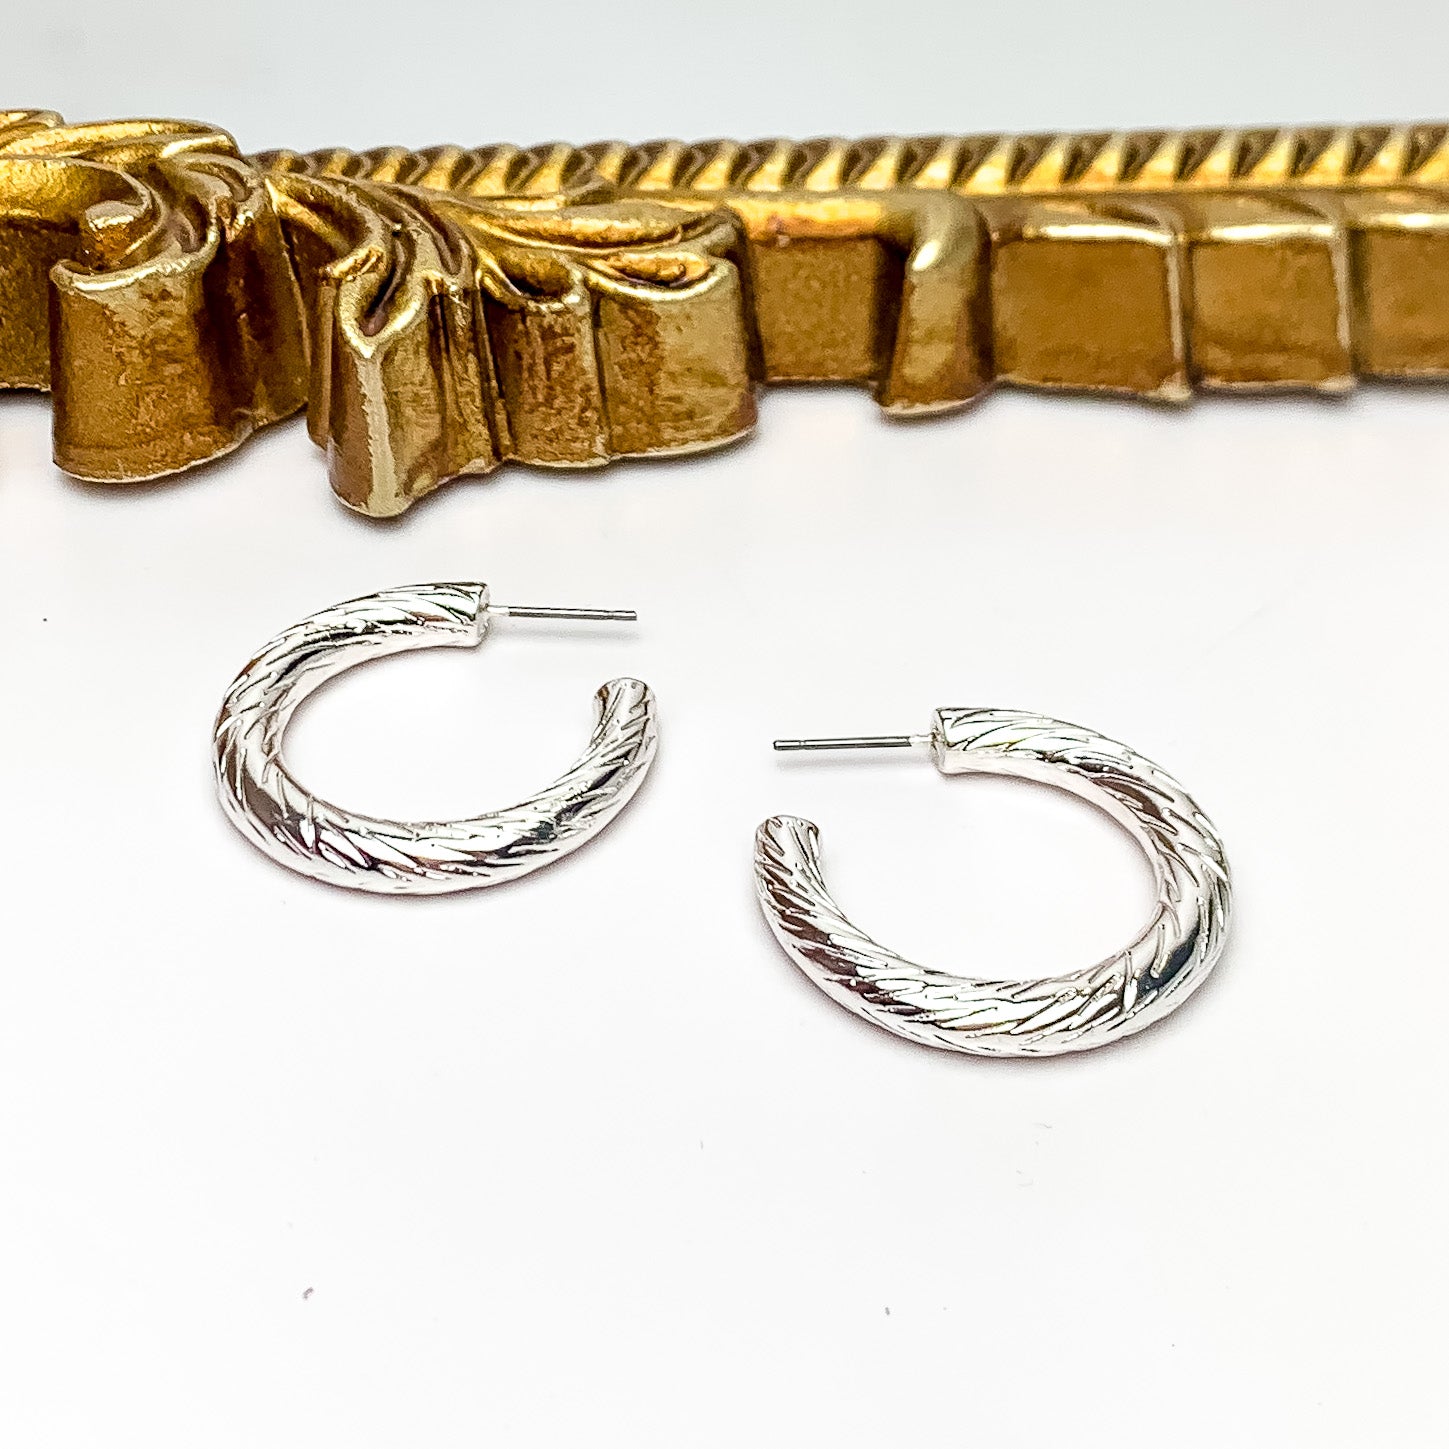 Silver Tone Small Twisted Hoop Earrings. Pictured on a white background with a gold frame above the earrings